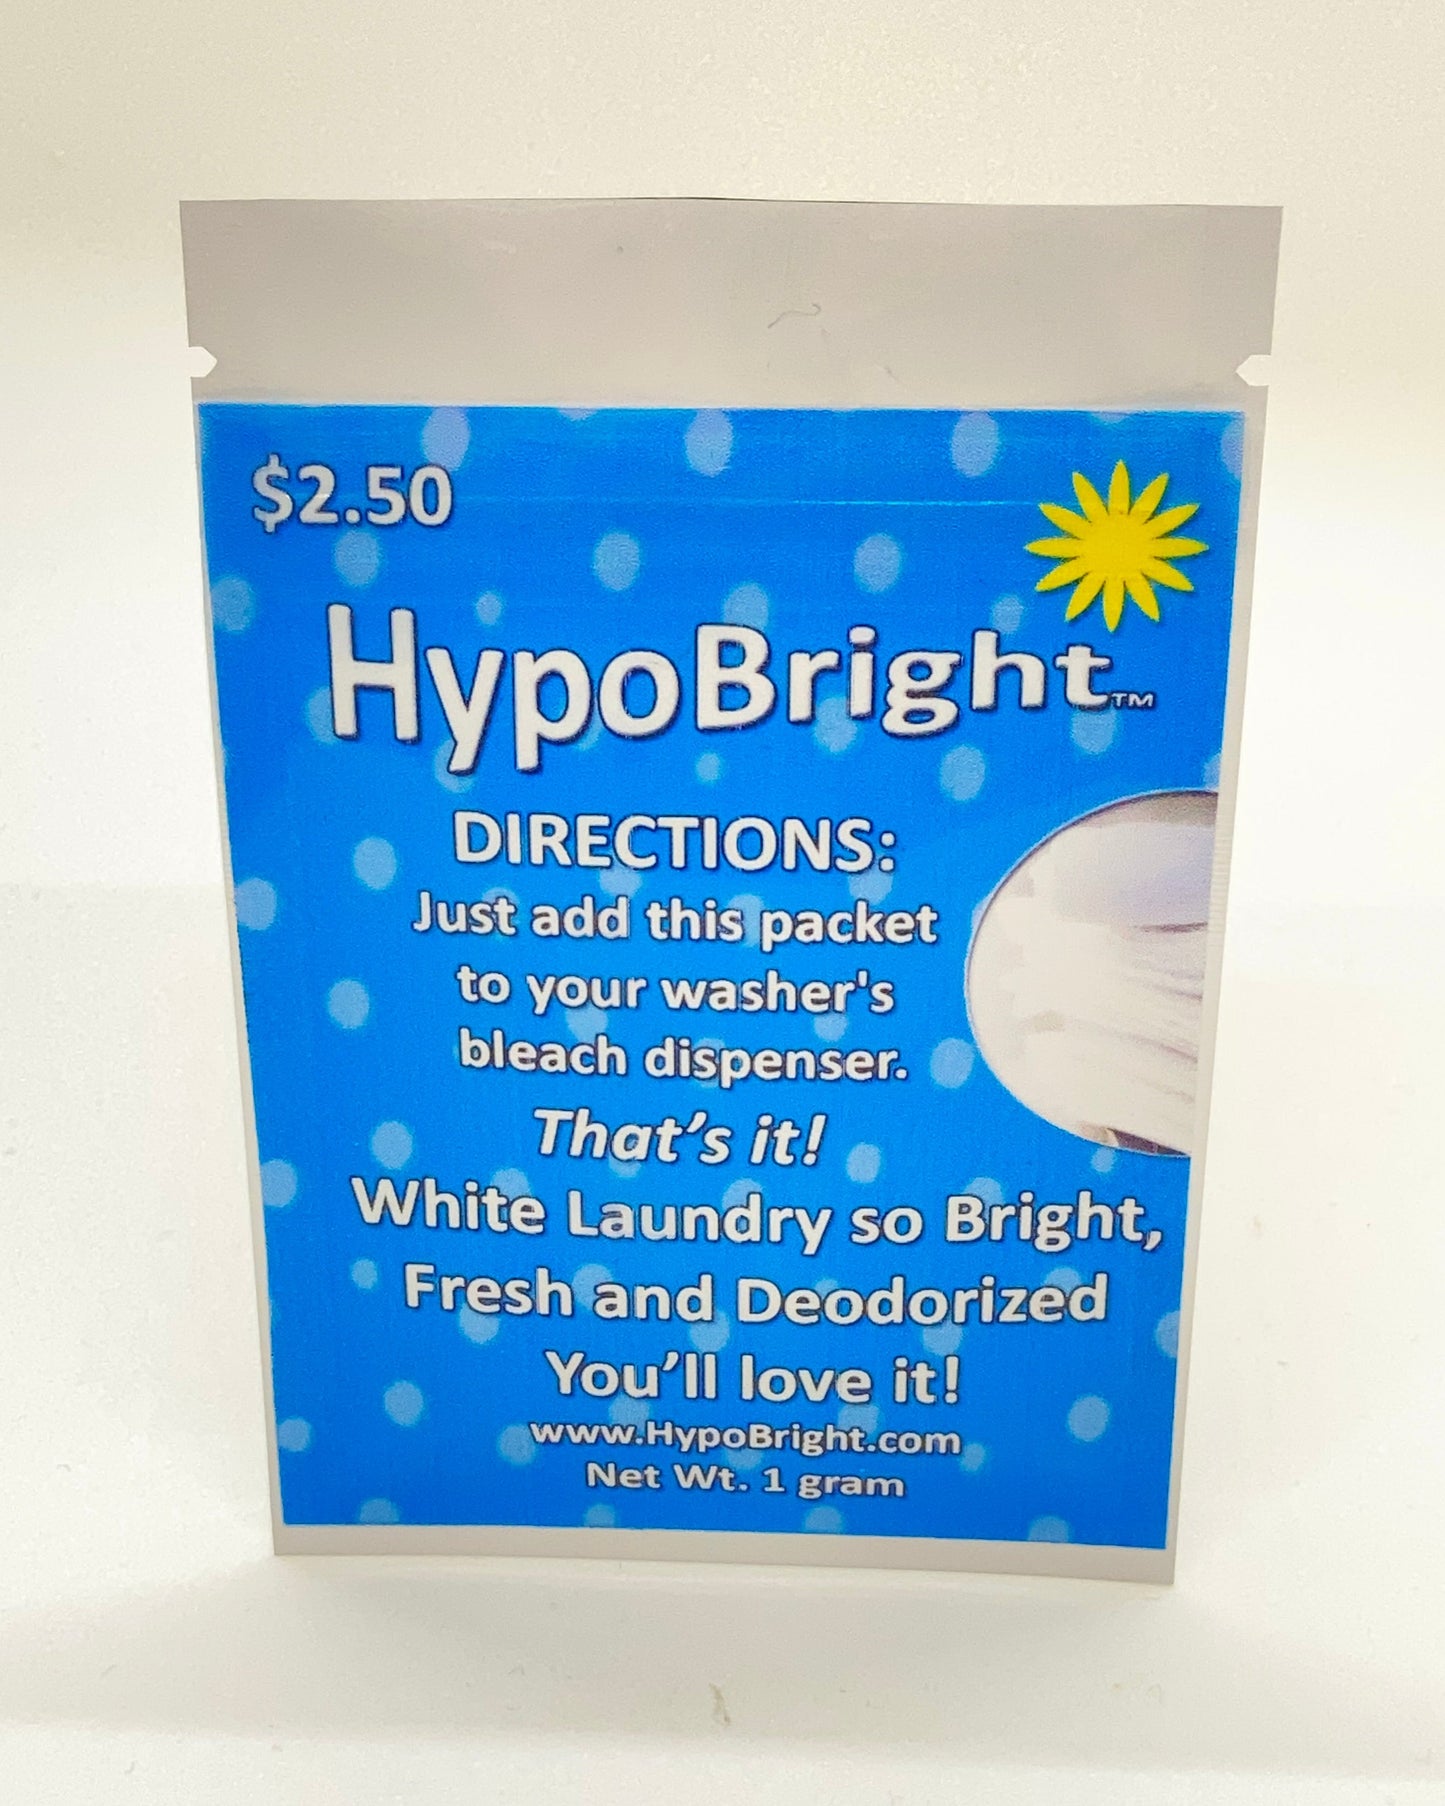 HypoBright Laundry Additive - 10 Pack - ready to use - Brightener and Deodorizer